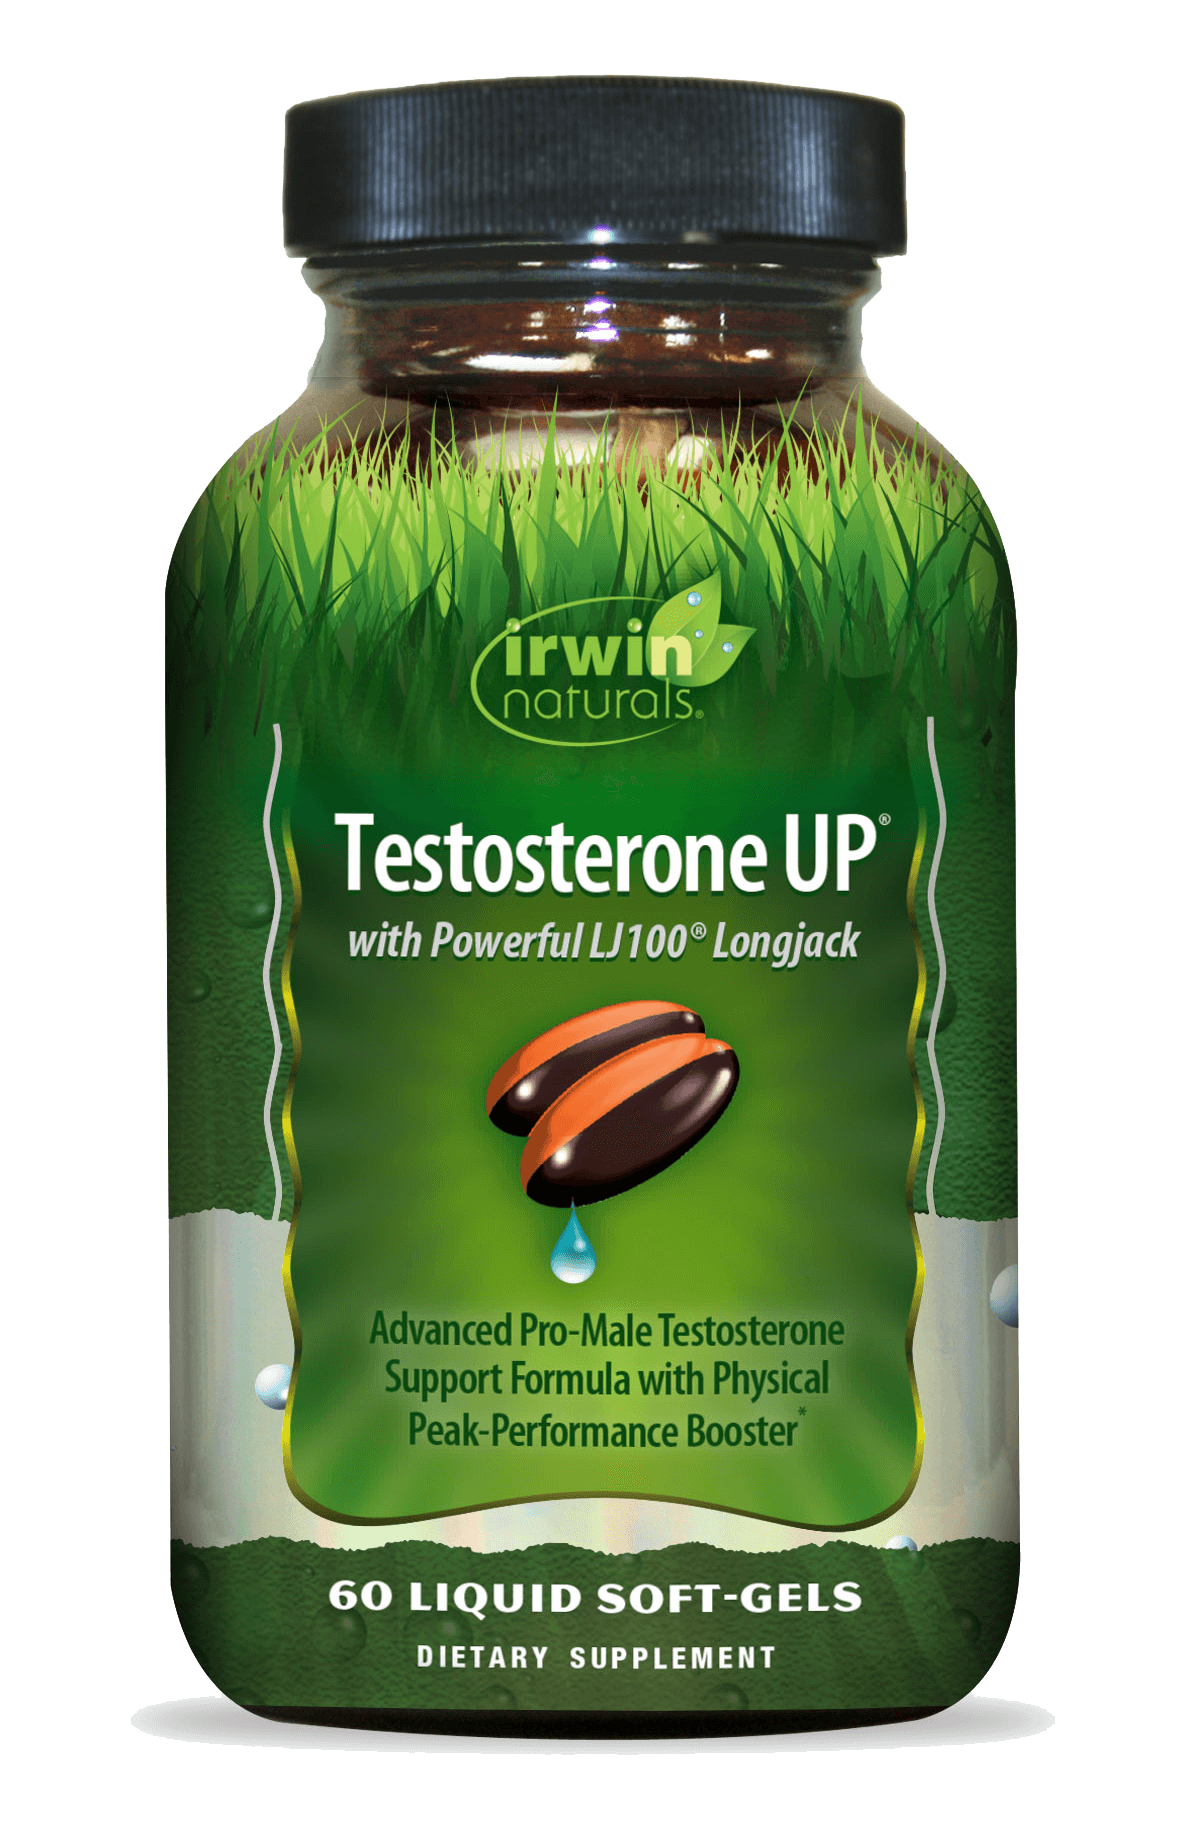 Testosterone UP with Powerful LJ100 Longjack by Irwin Naturals